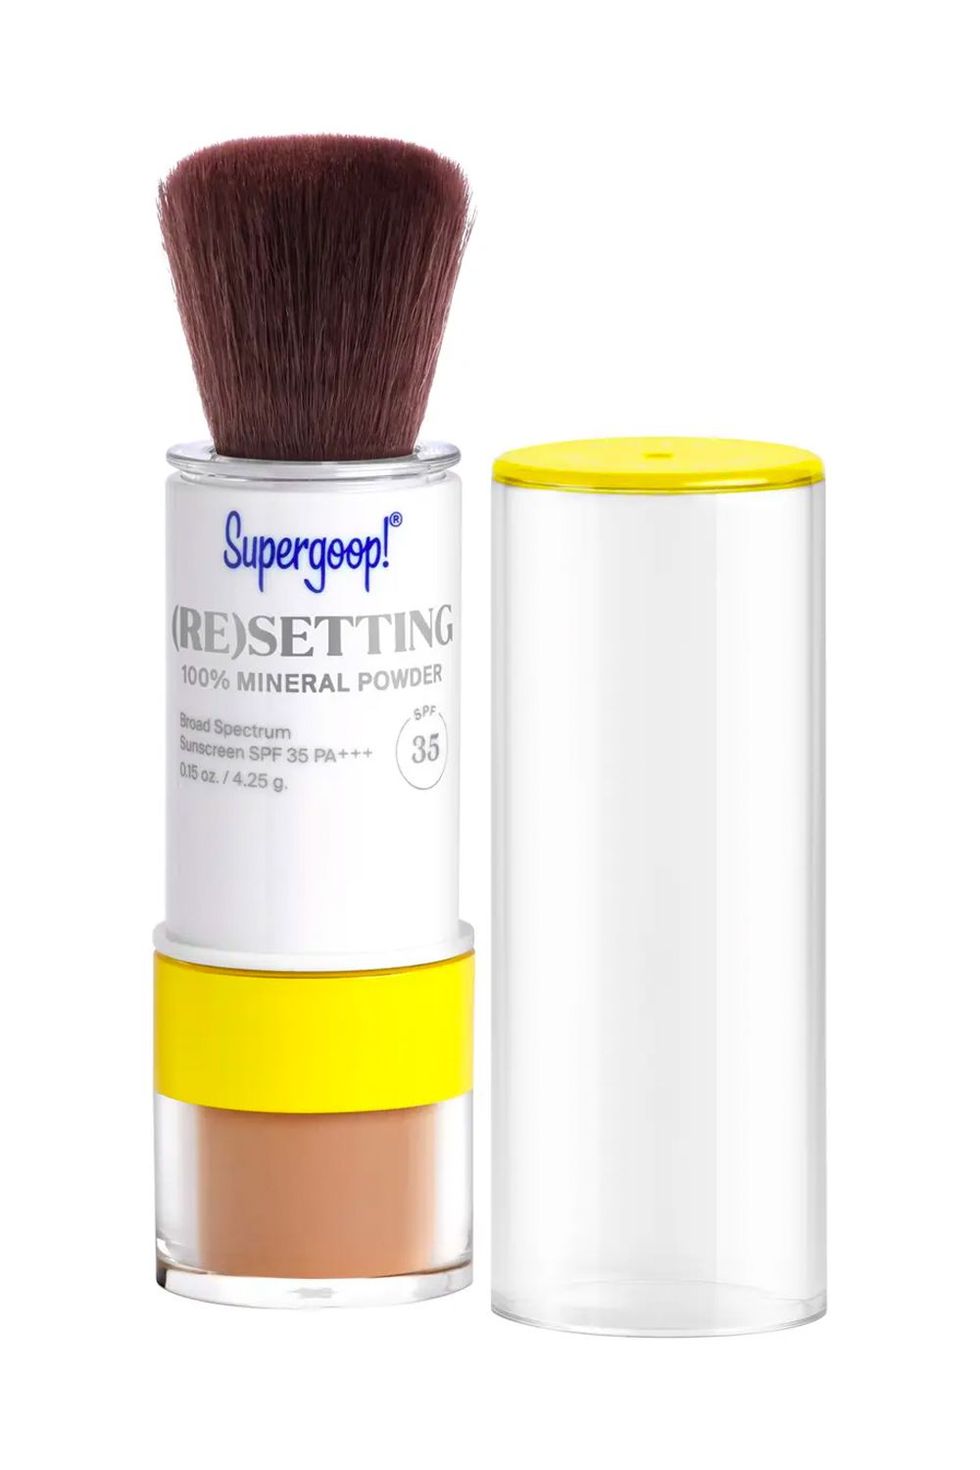 BRUSH ON BLOCK® SPF on Instagram: Applying sunscreen over your makeup has  never been easier! Our mess free Mineral Powder Sunscreen SPF 30 will never  smudge or ruin your makeup, and leaves